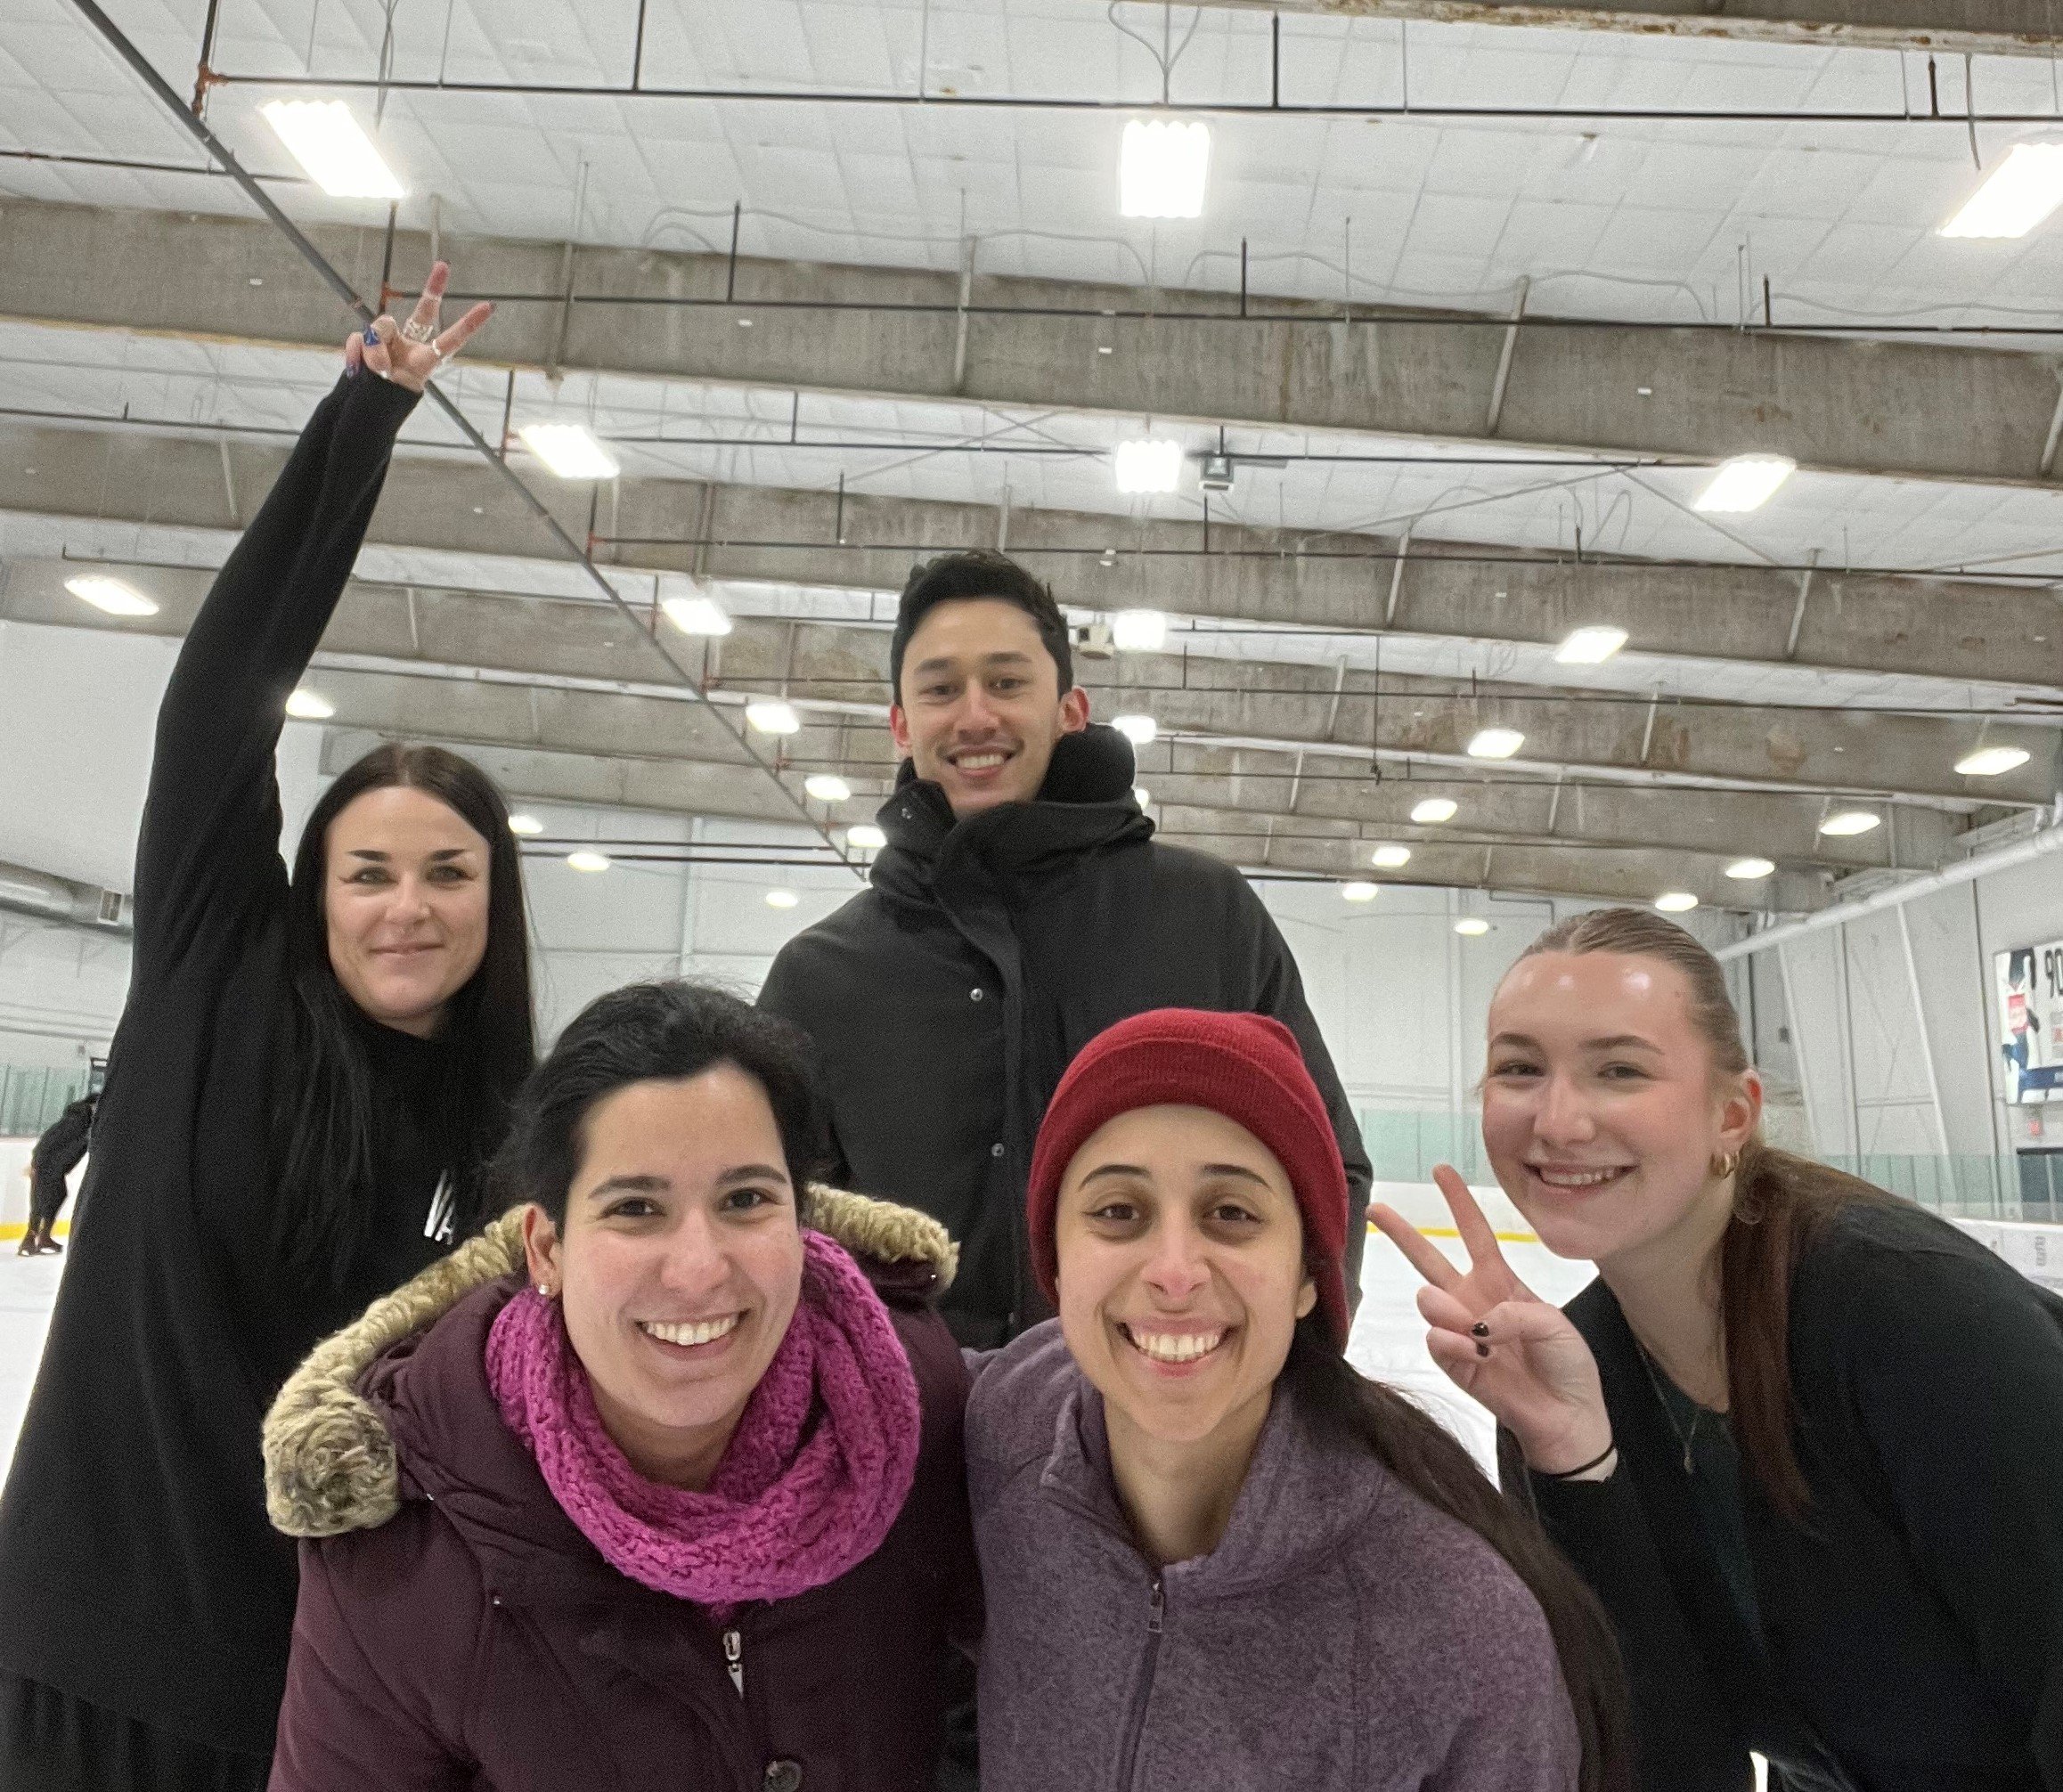 skating group picture.jpg